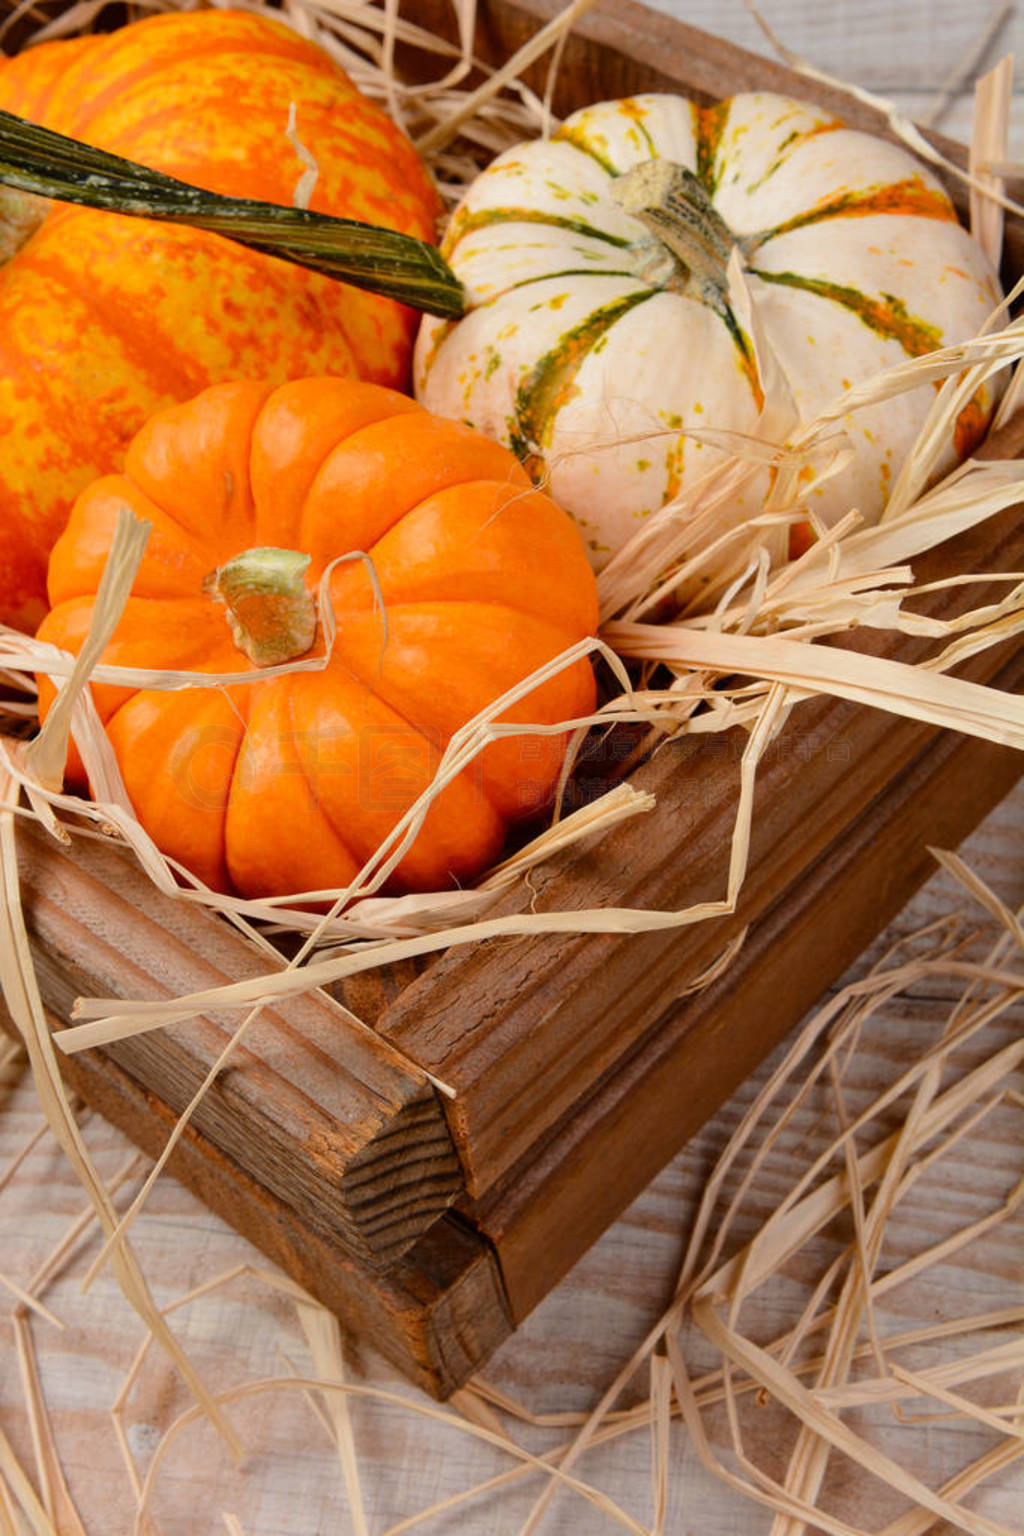 Decorative pumpkins and gourds in wooden crate with straw.